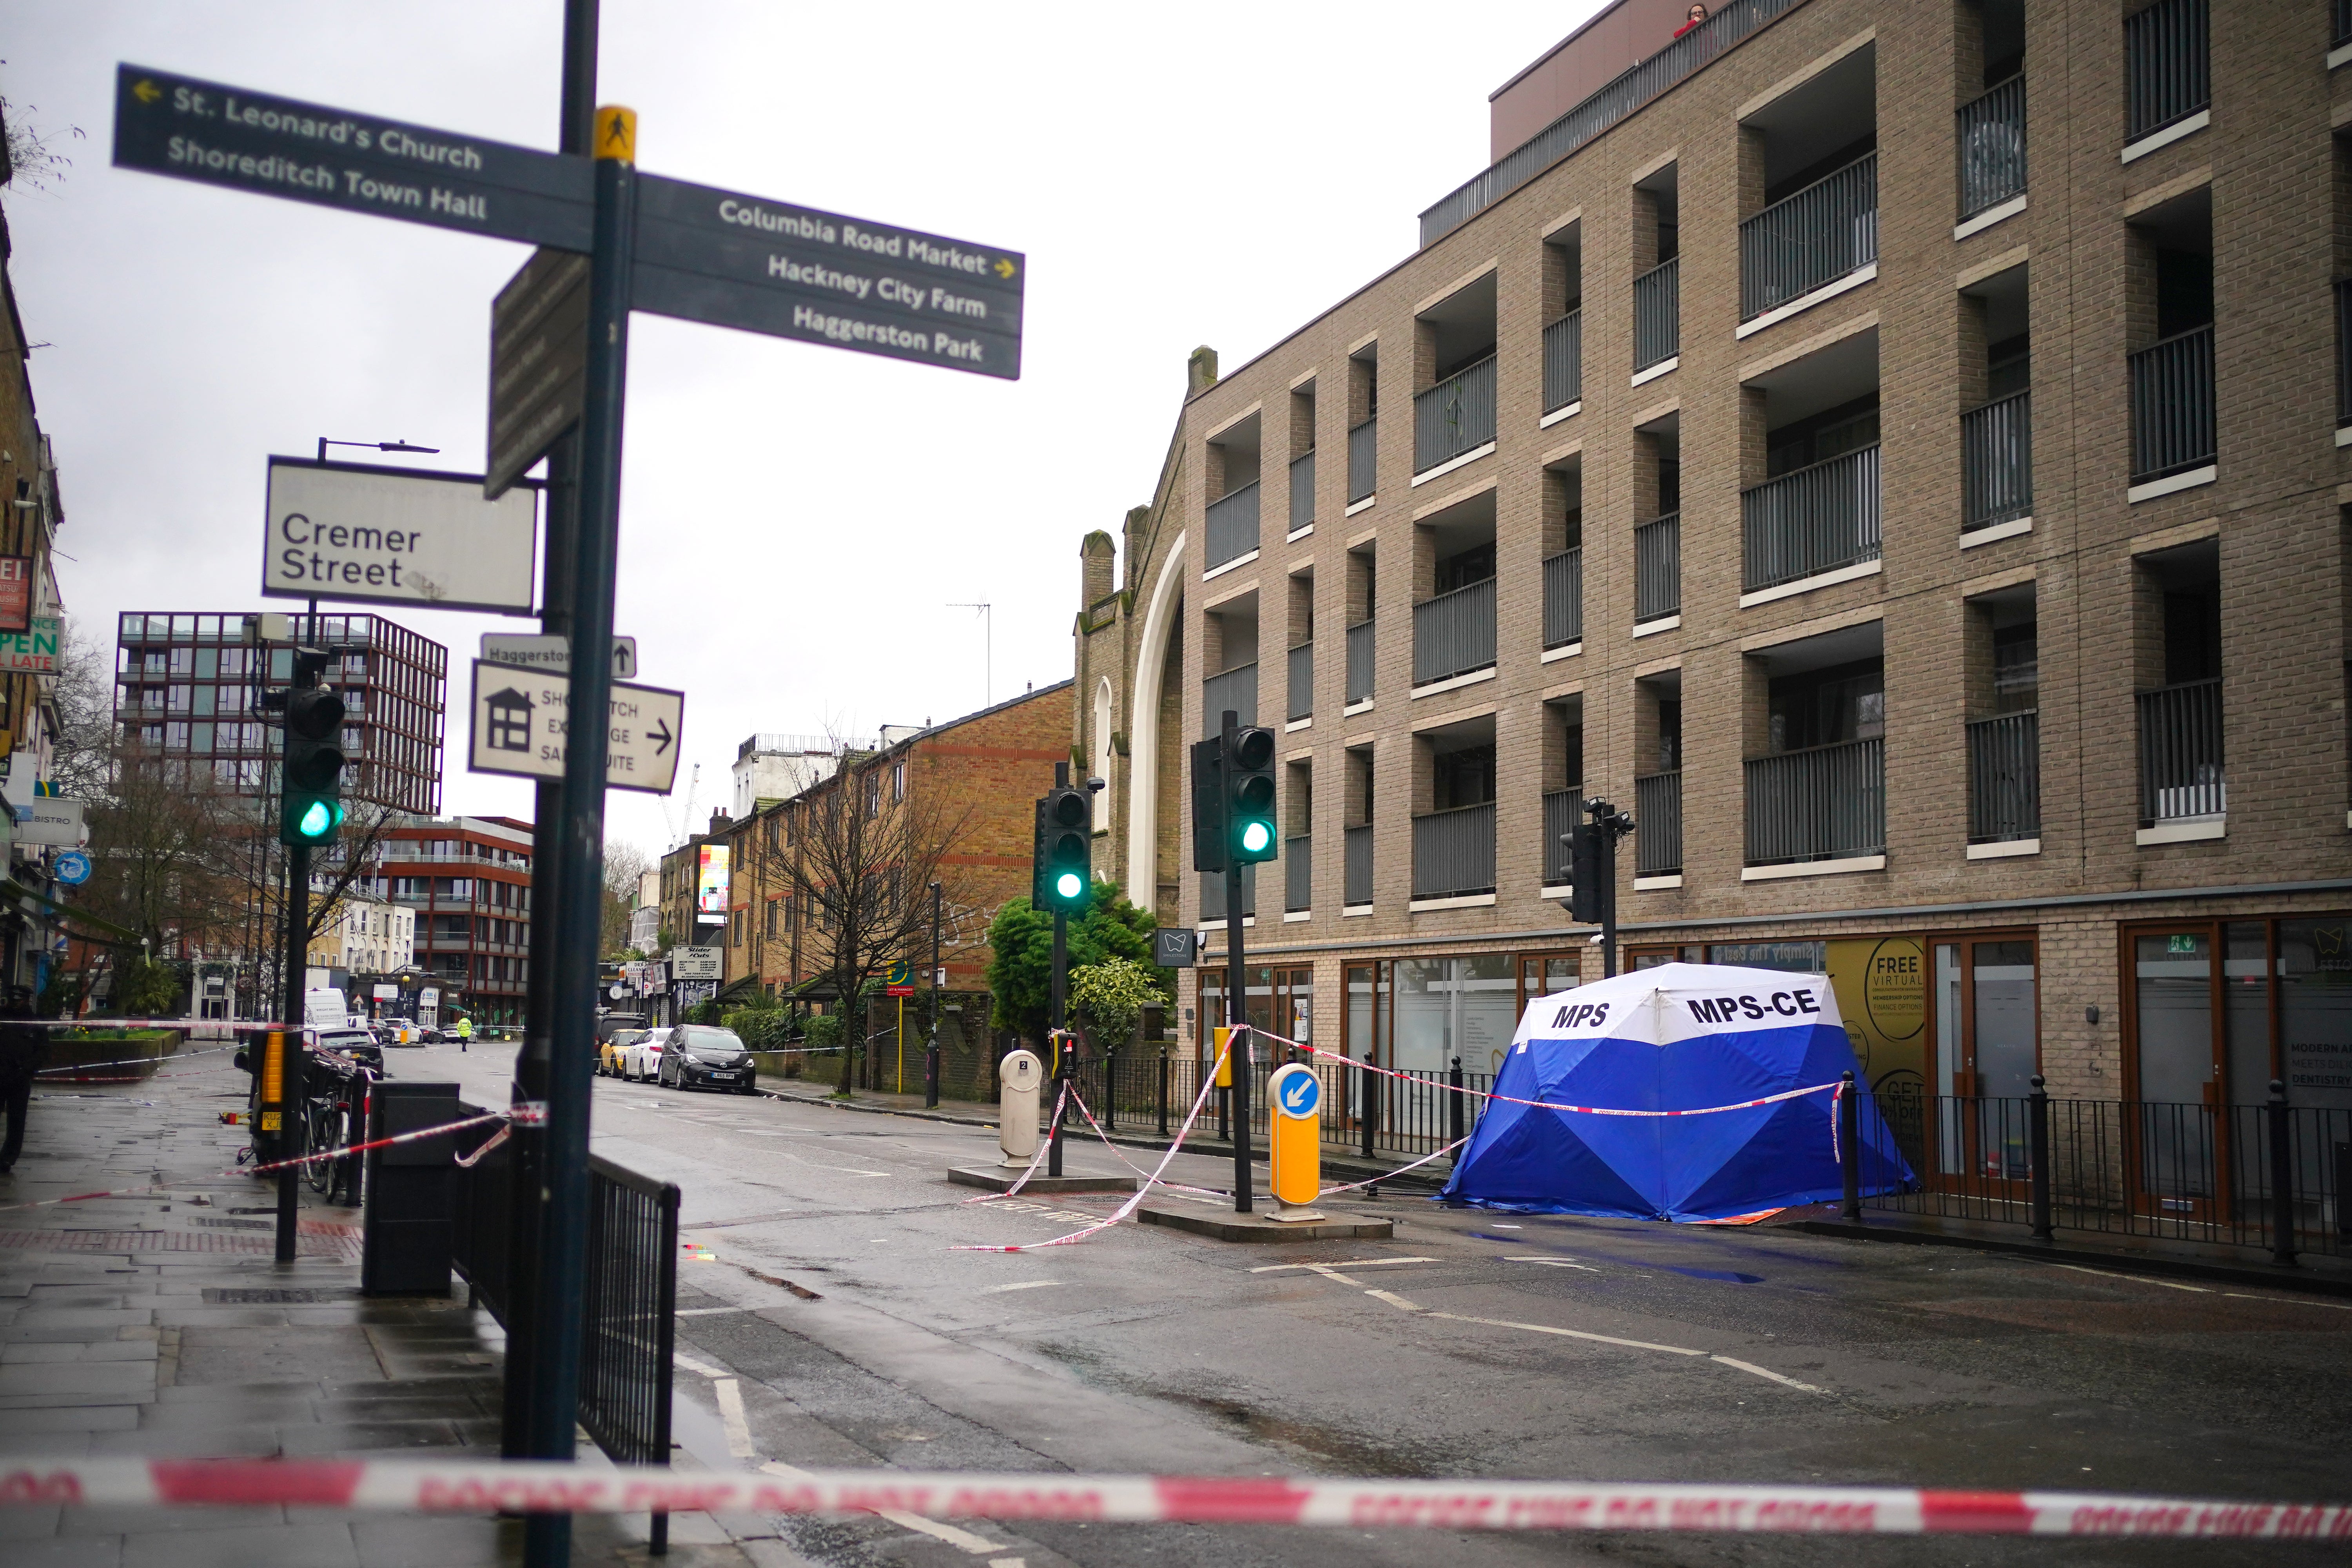 The scene of the murder in east London